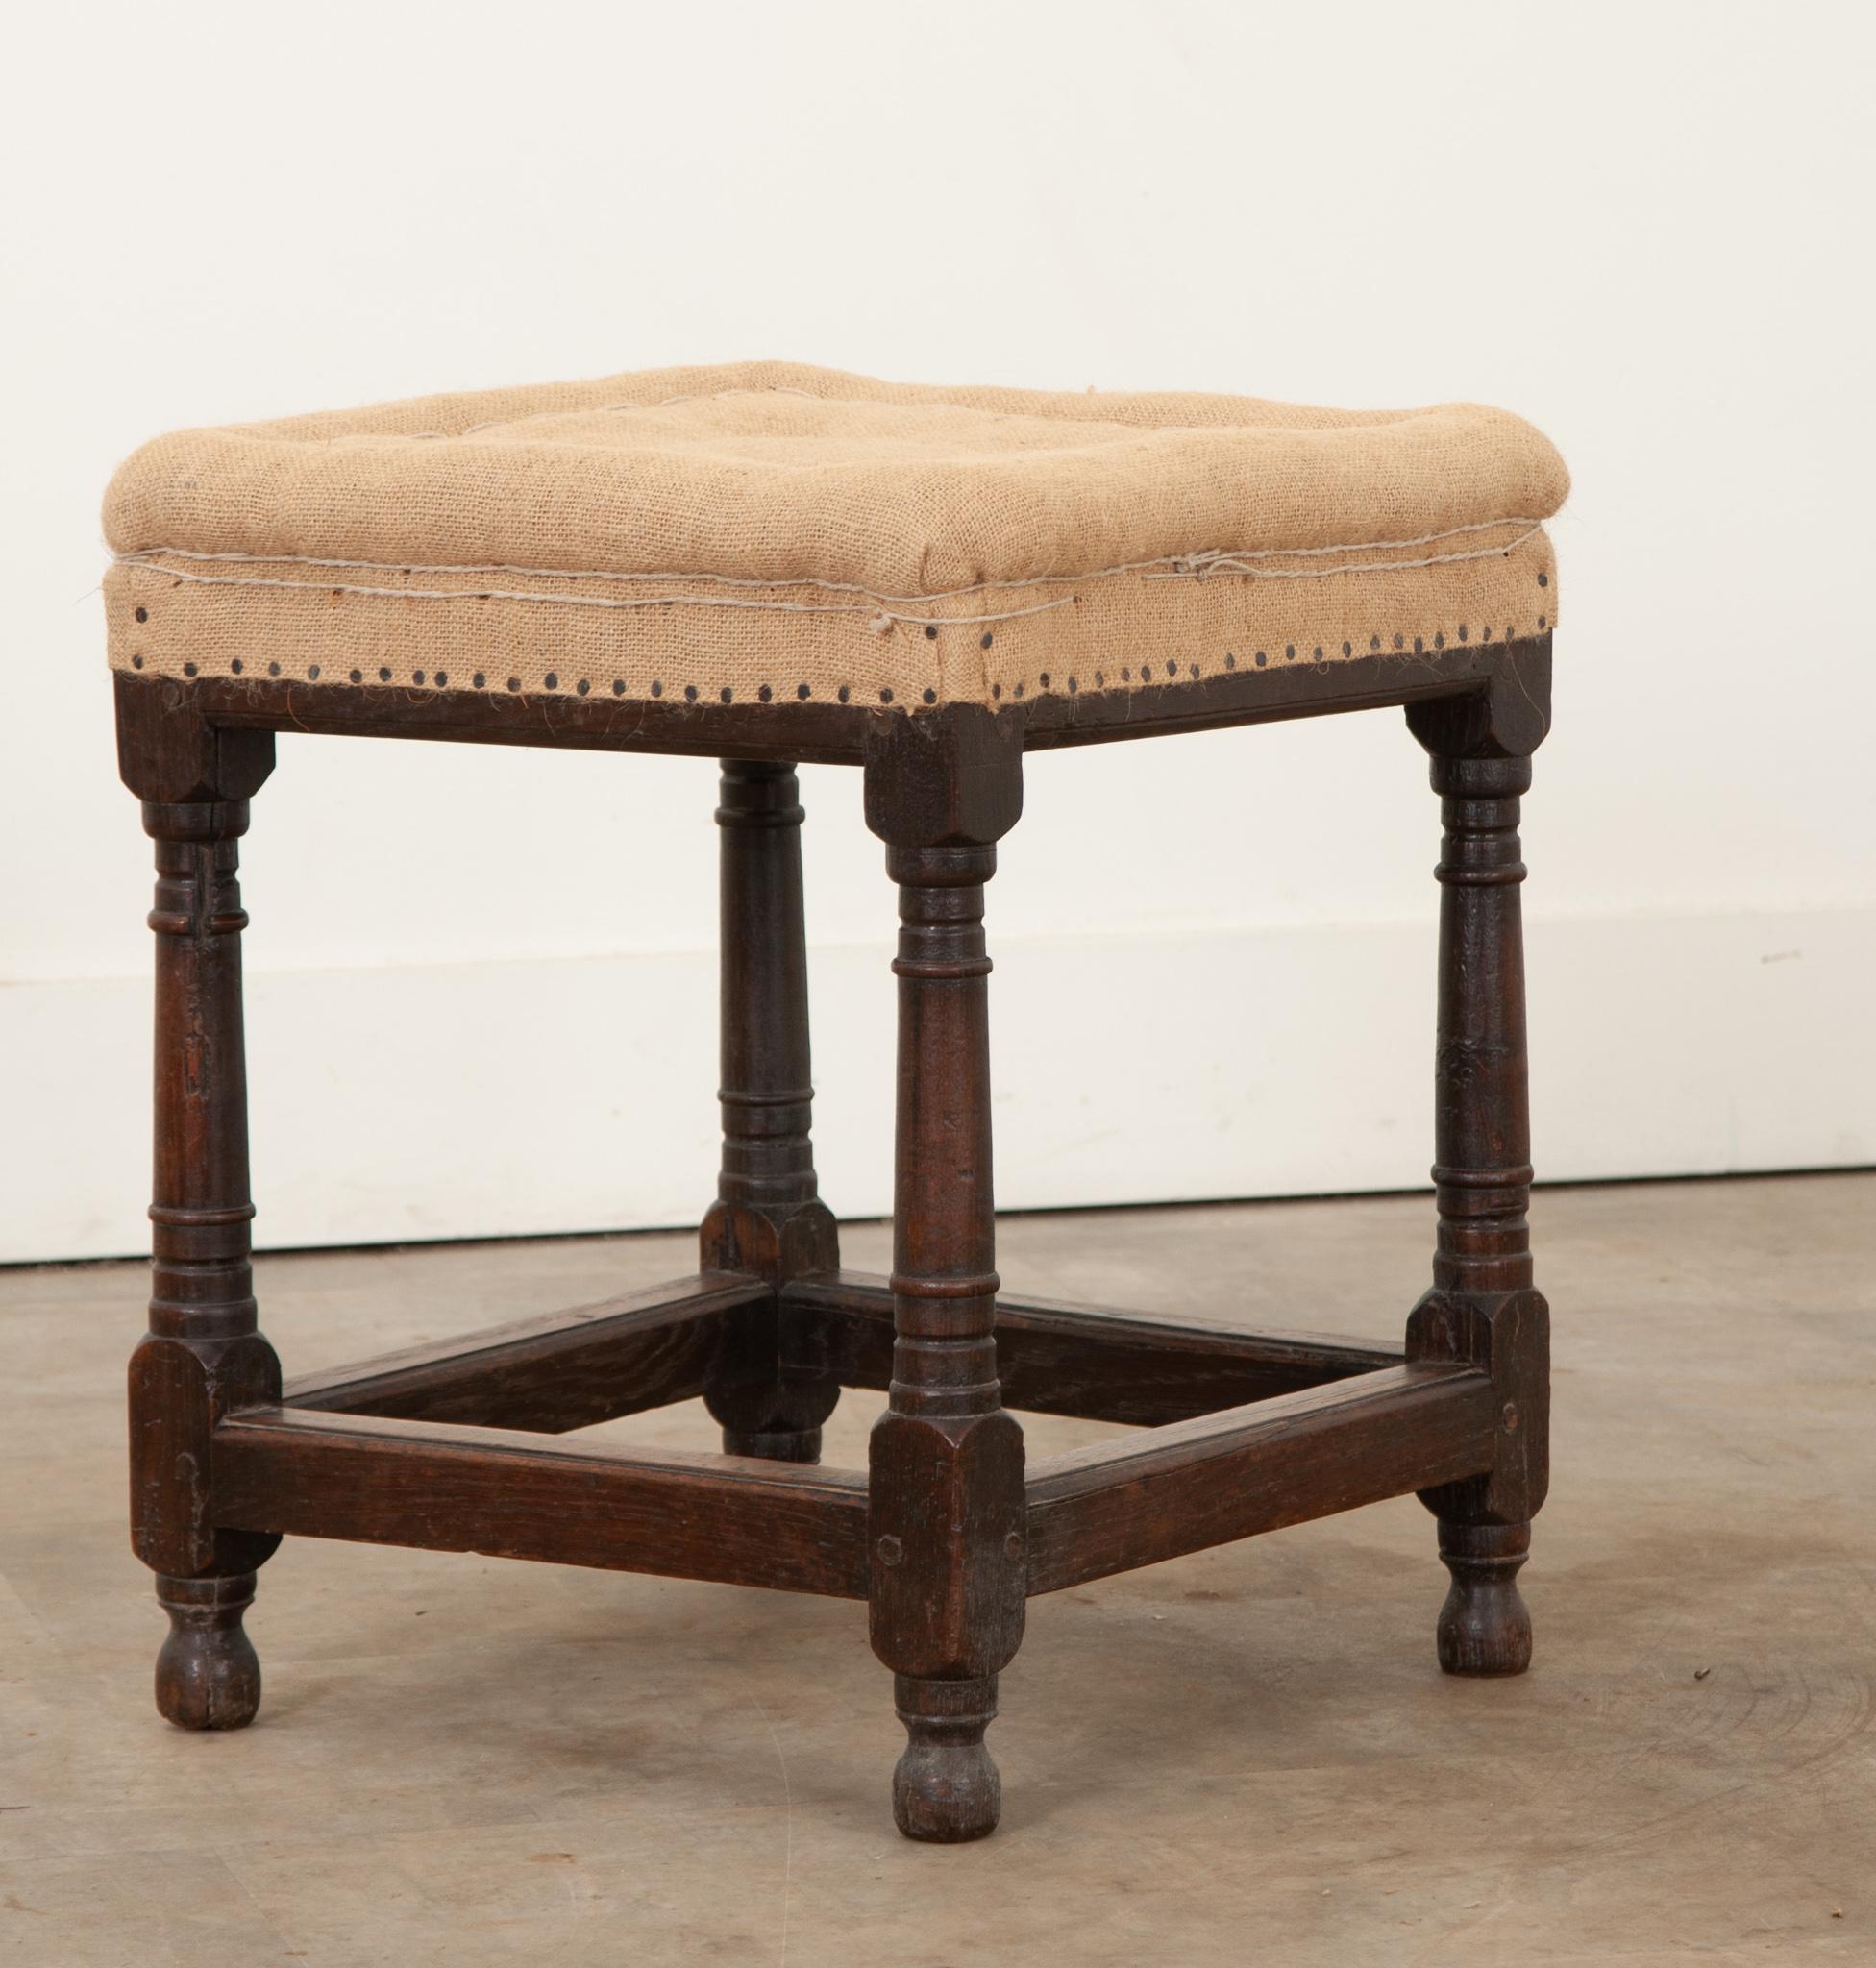 A sturdy, hand carved, solid oak stool from the 1800’s. The top cushion is filled with horse hair and is ready for its next layer of upholstery. The firm cushion is resting over four turned and carved dark oak legs connected with stretchers, adding